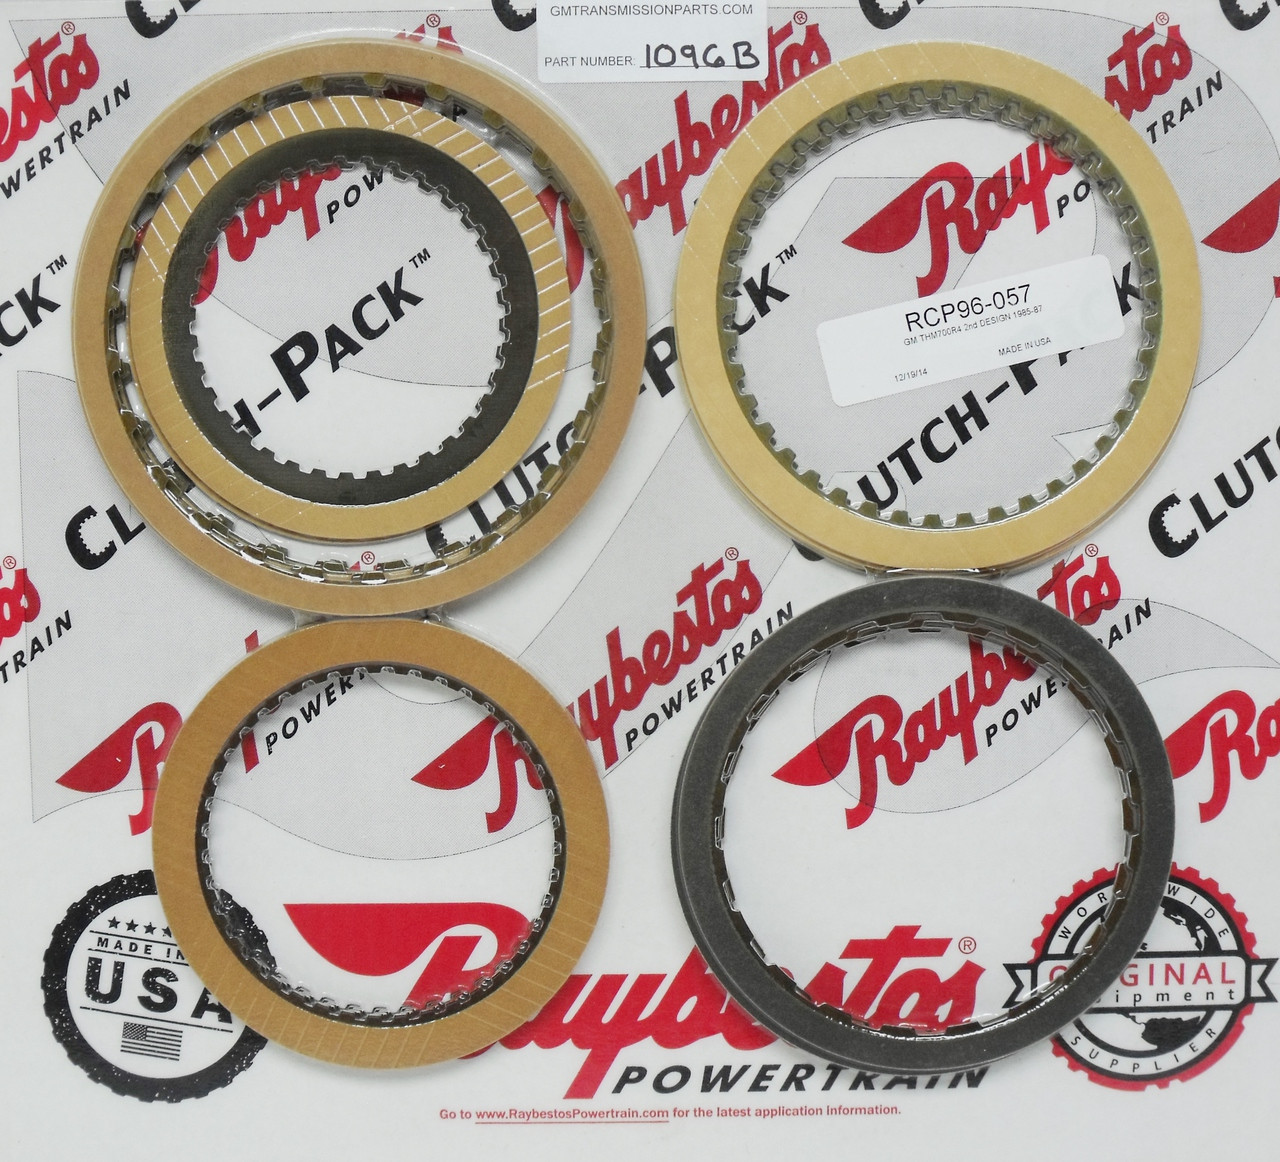 700R4 Friction Kit (With NO 3-4 Frictions) Raybestos (1985-1987)